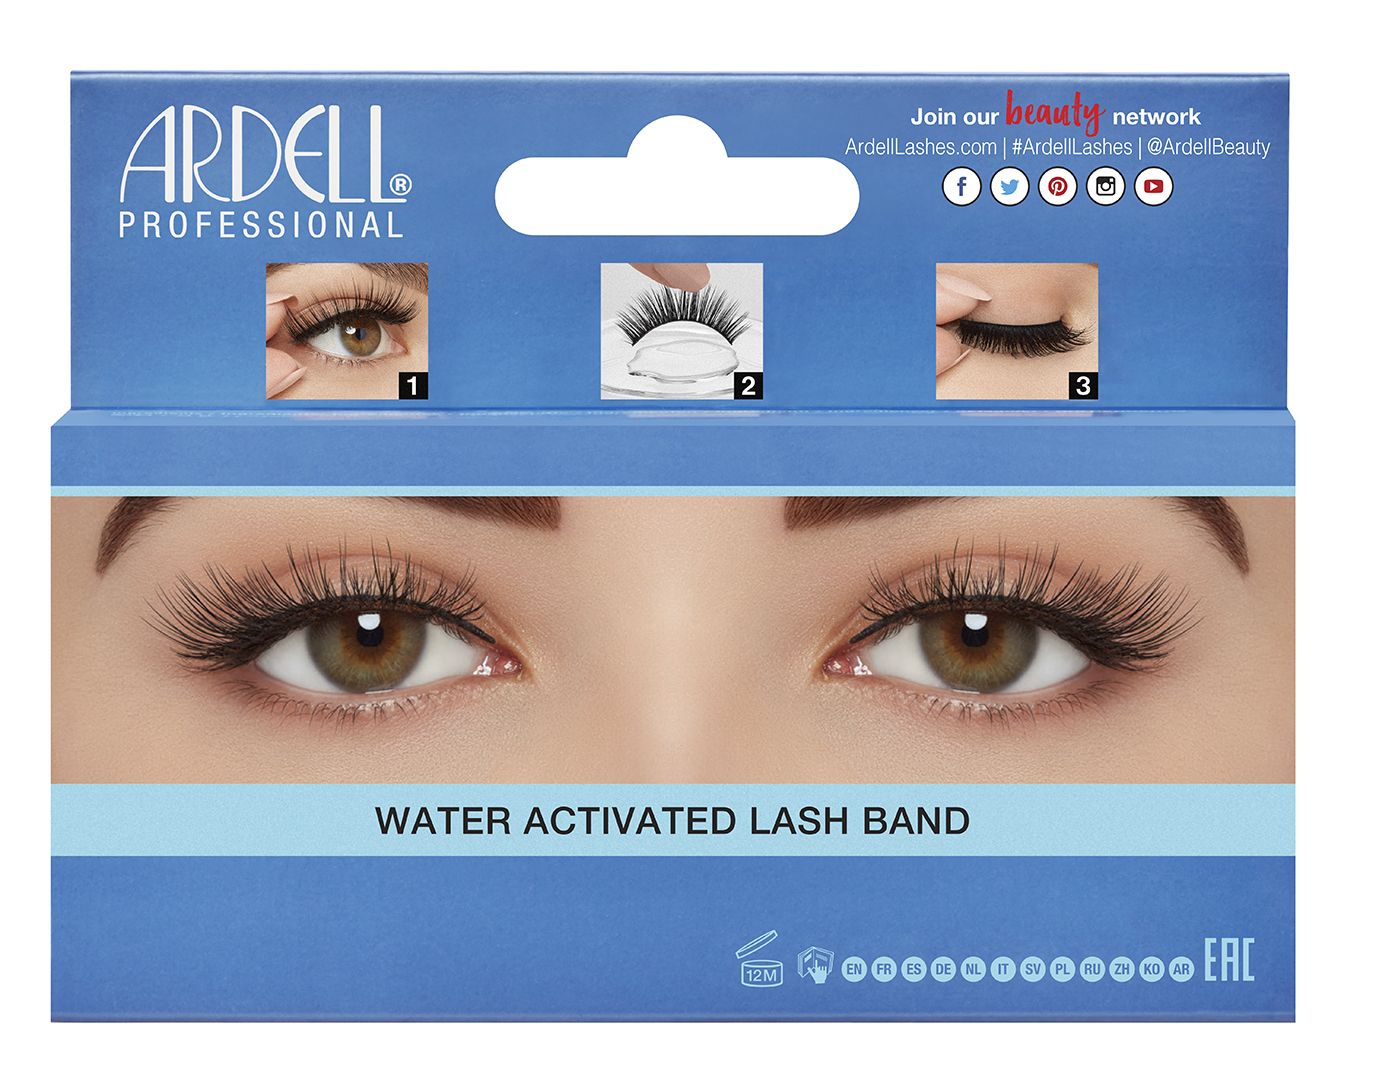 Back of Ardell Aqua Lash 341 Aqua Lash packaging featuring instructions and close up of a model's eyes wearing false lashes